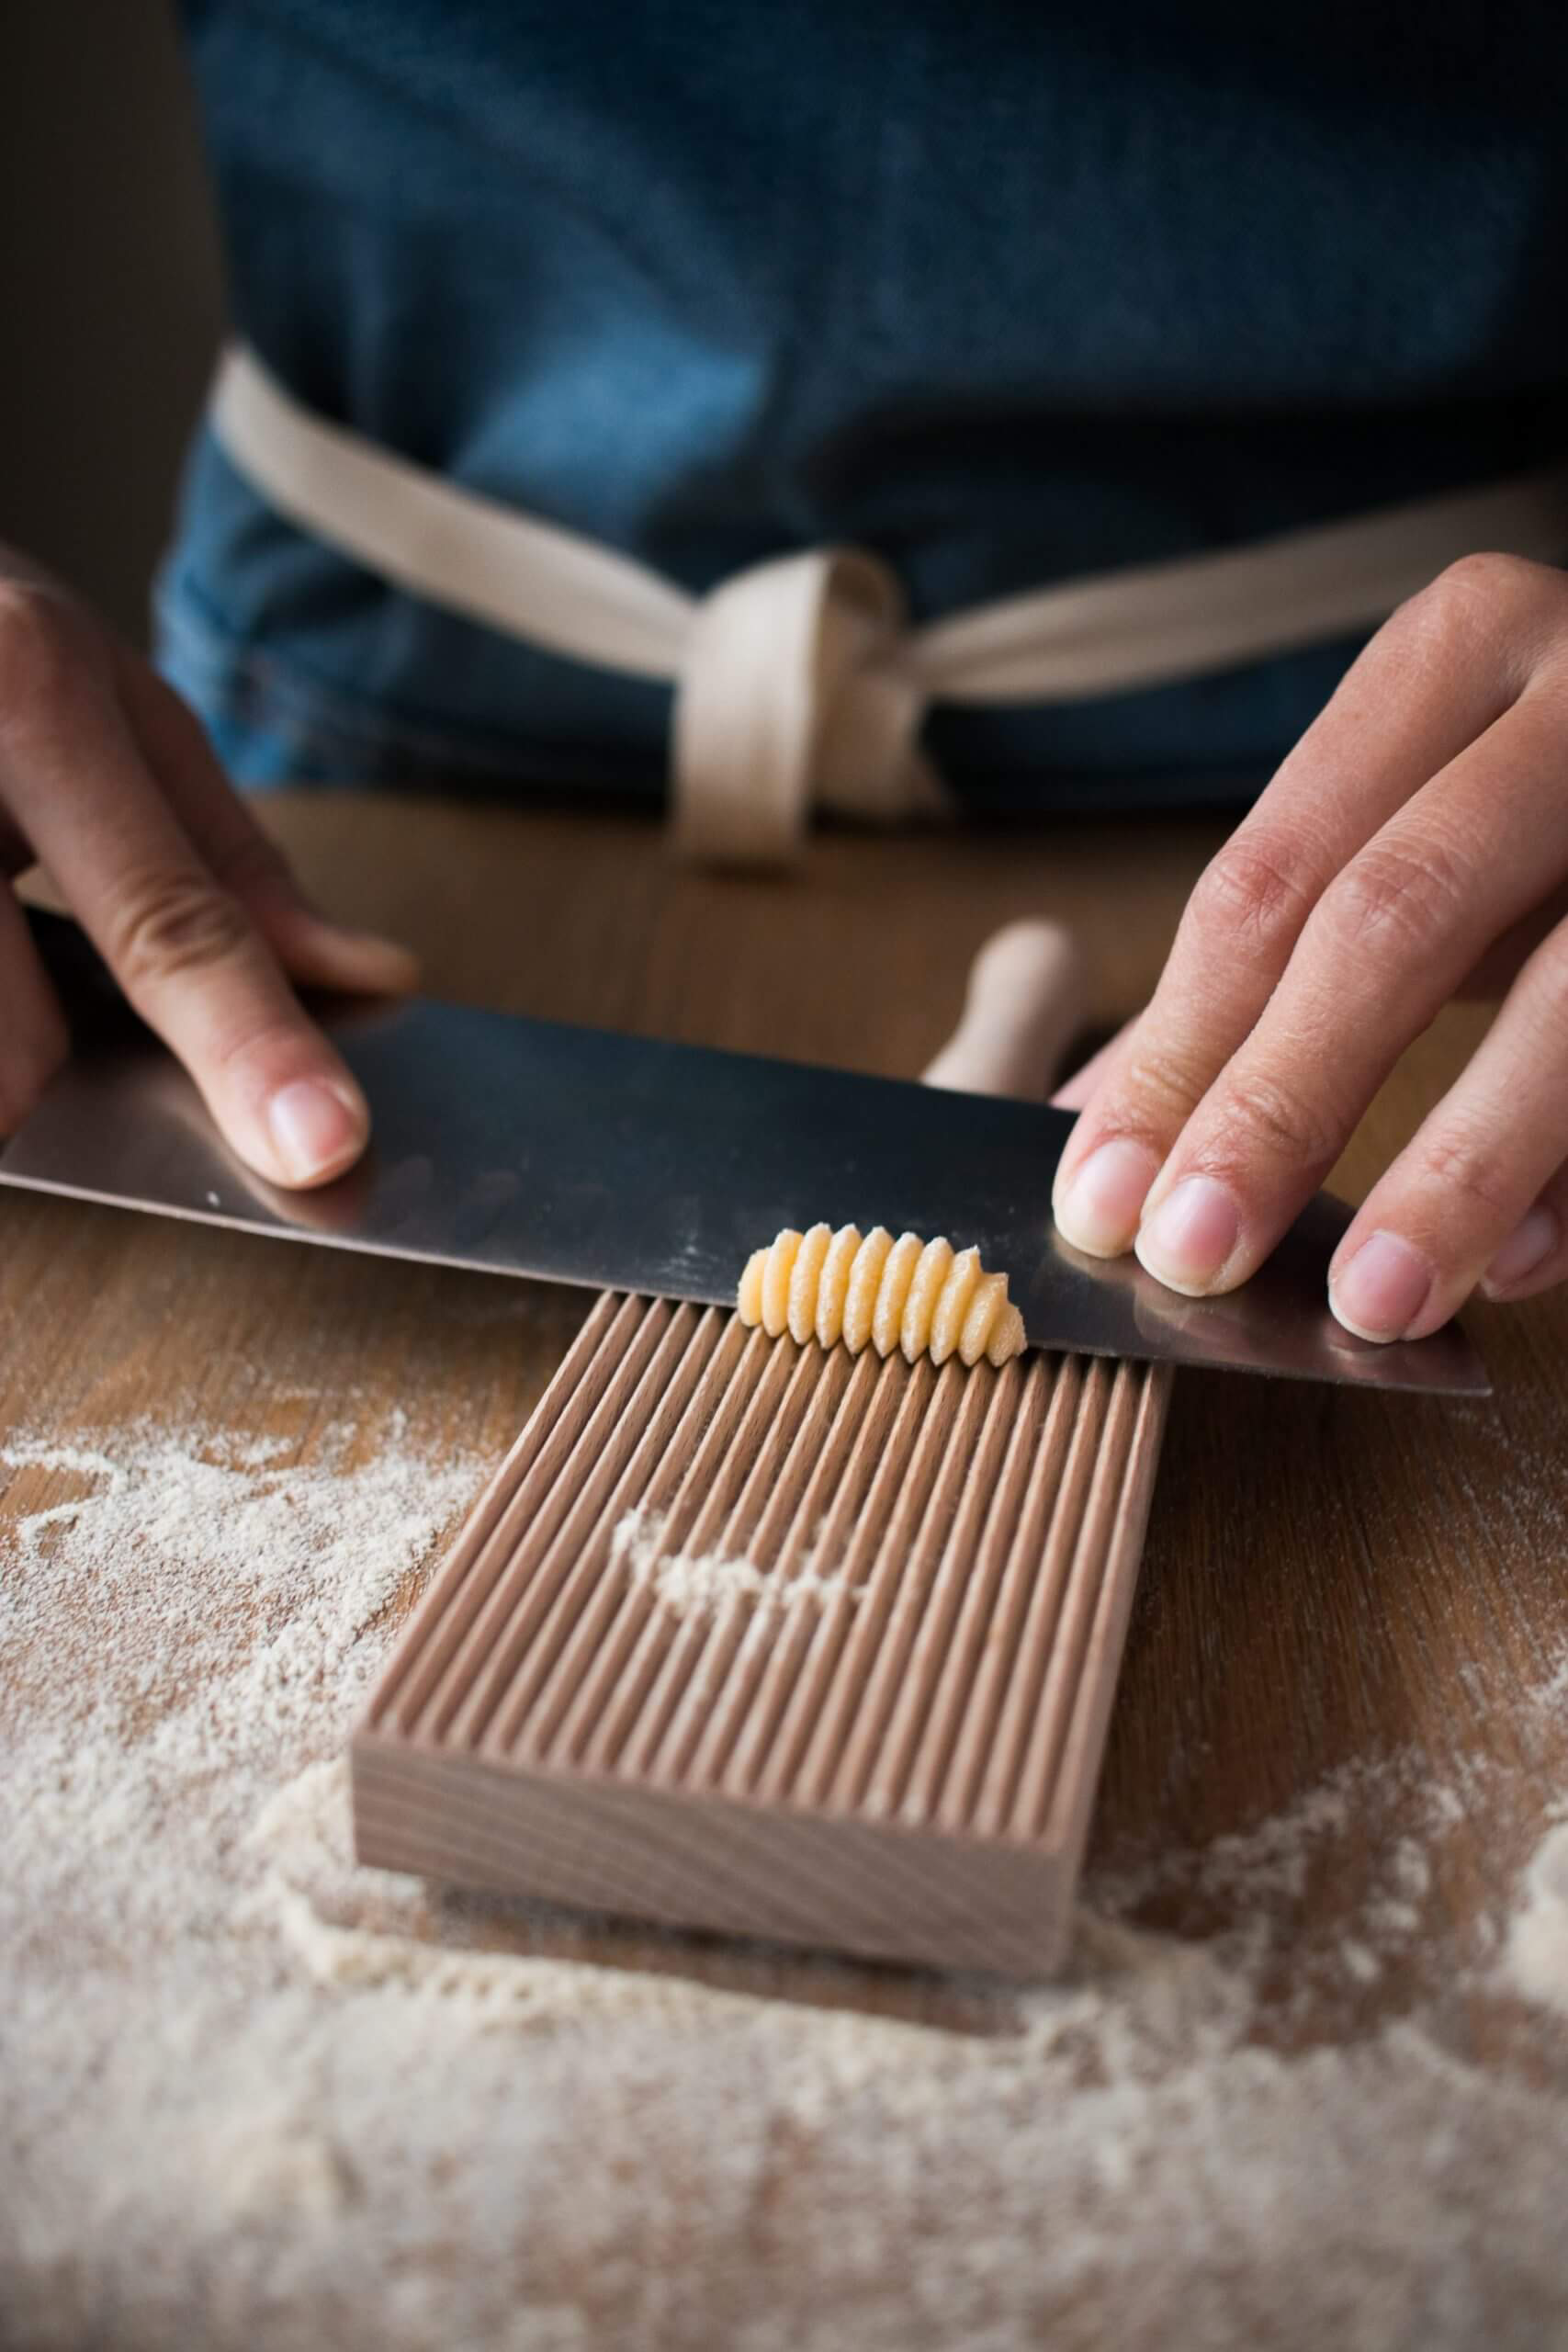 Experienced hands rolling out homemade gnocchi on a gnocchi roller board with a chef's knife.